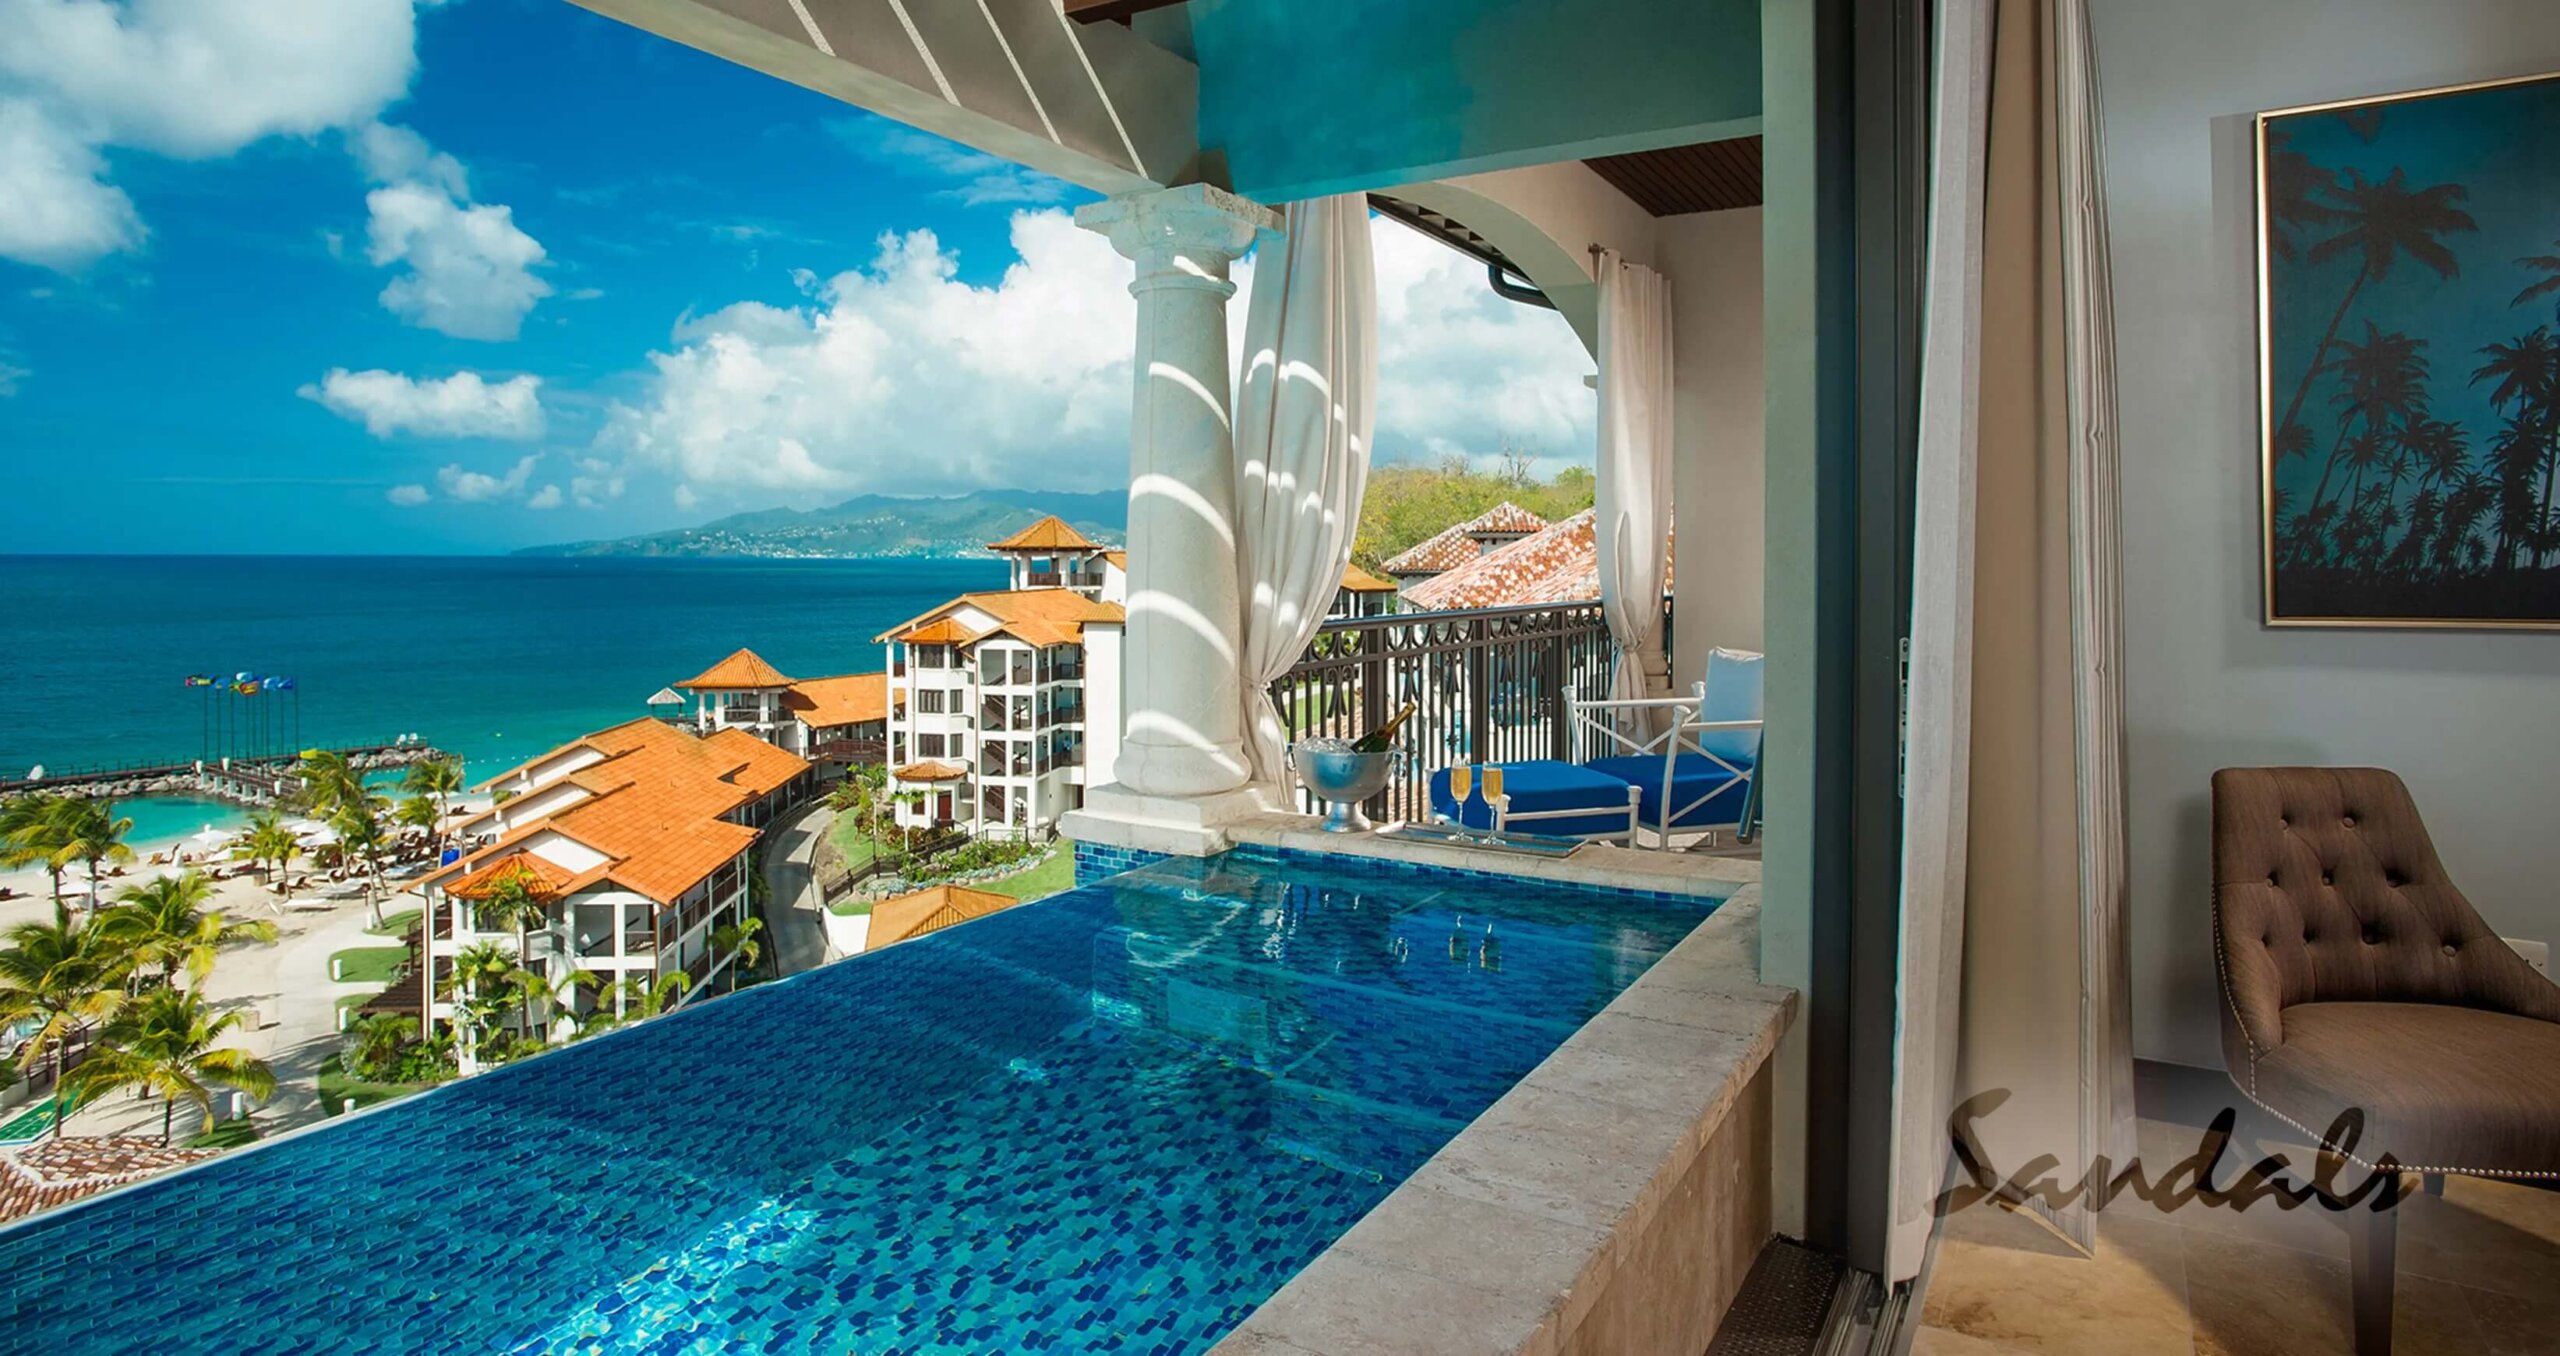 Honeymoon suite in the Caribbean at Sandals Grenada with private plunge pool on balcony. 